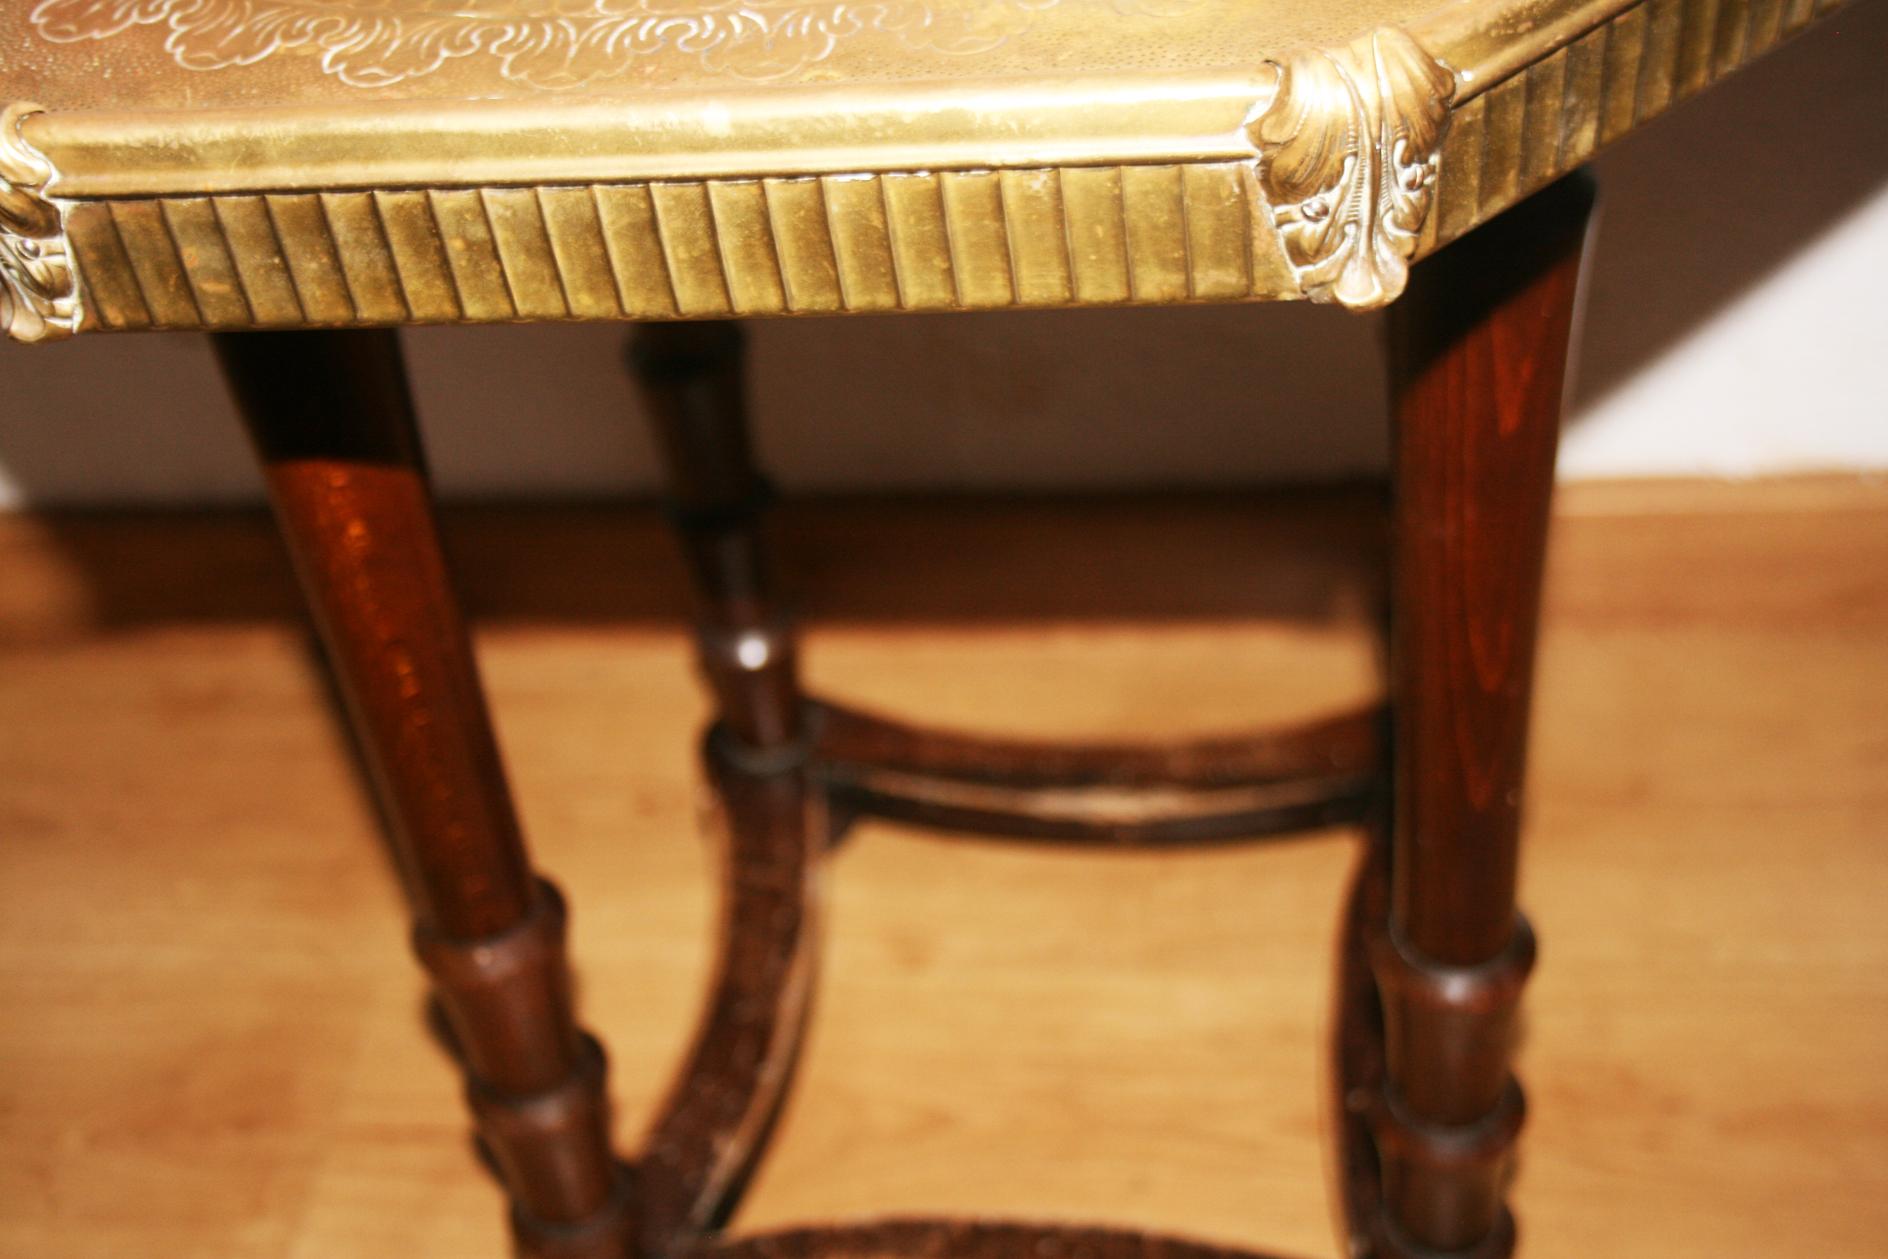 Other Side Table Embossed Brass Topu and Wooden Legs, England